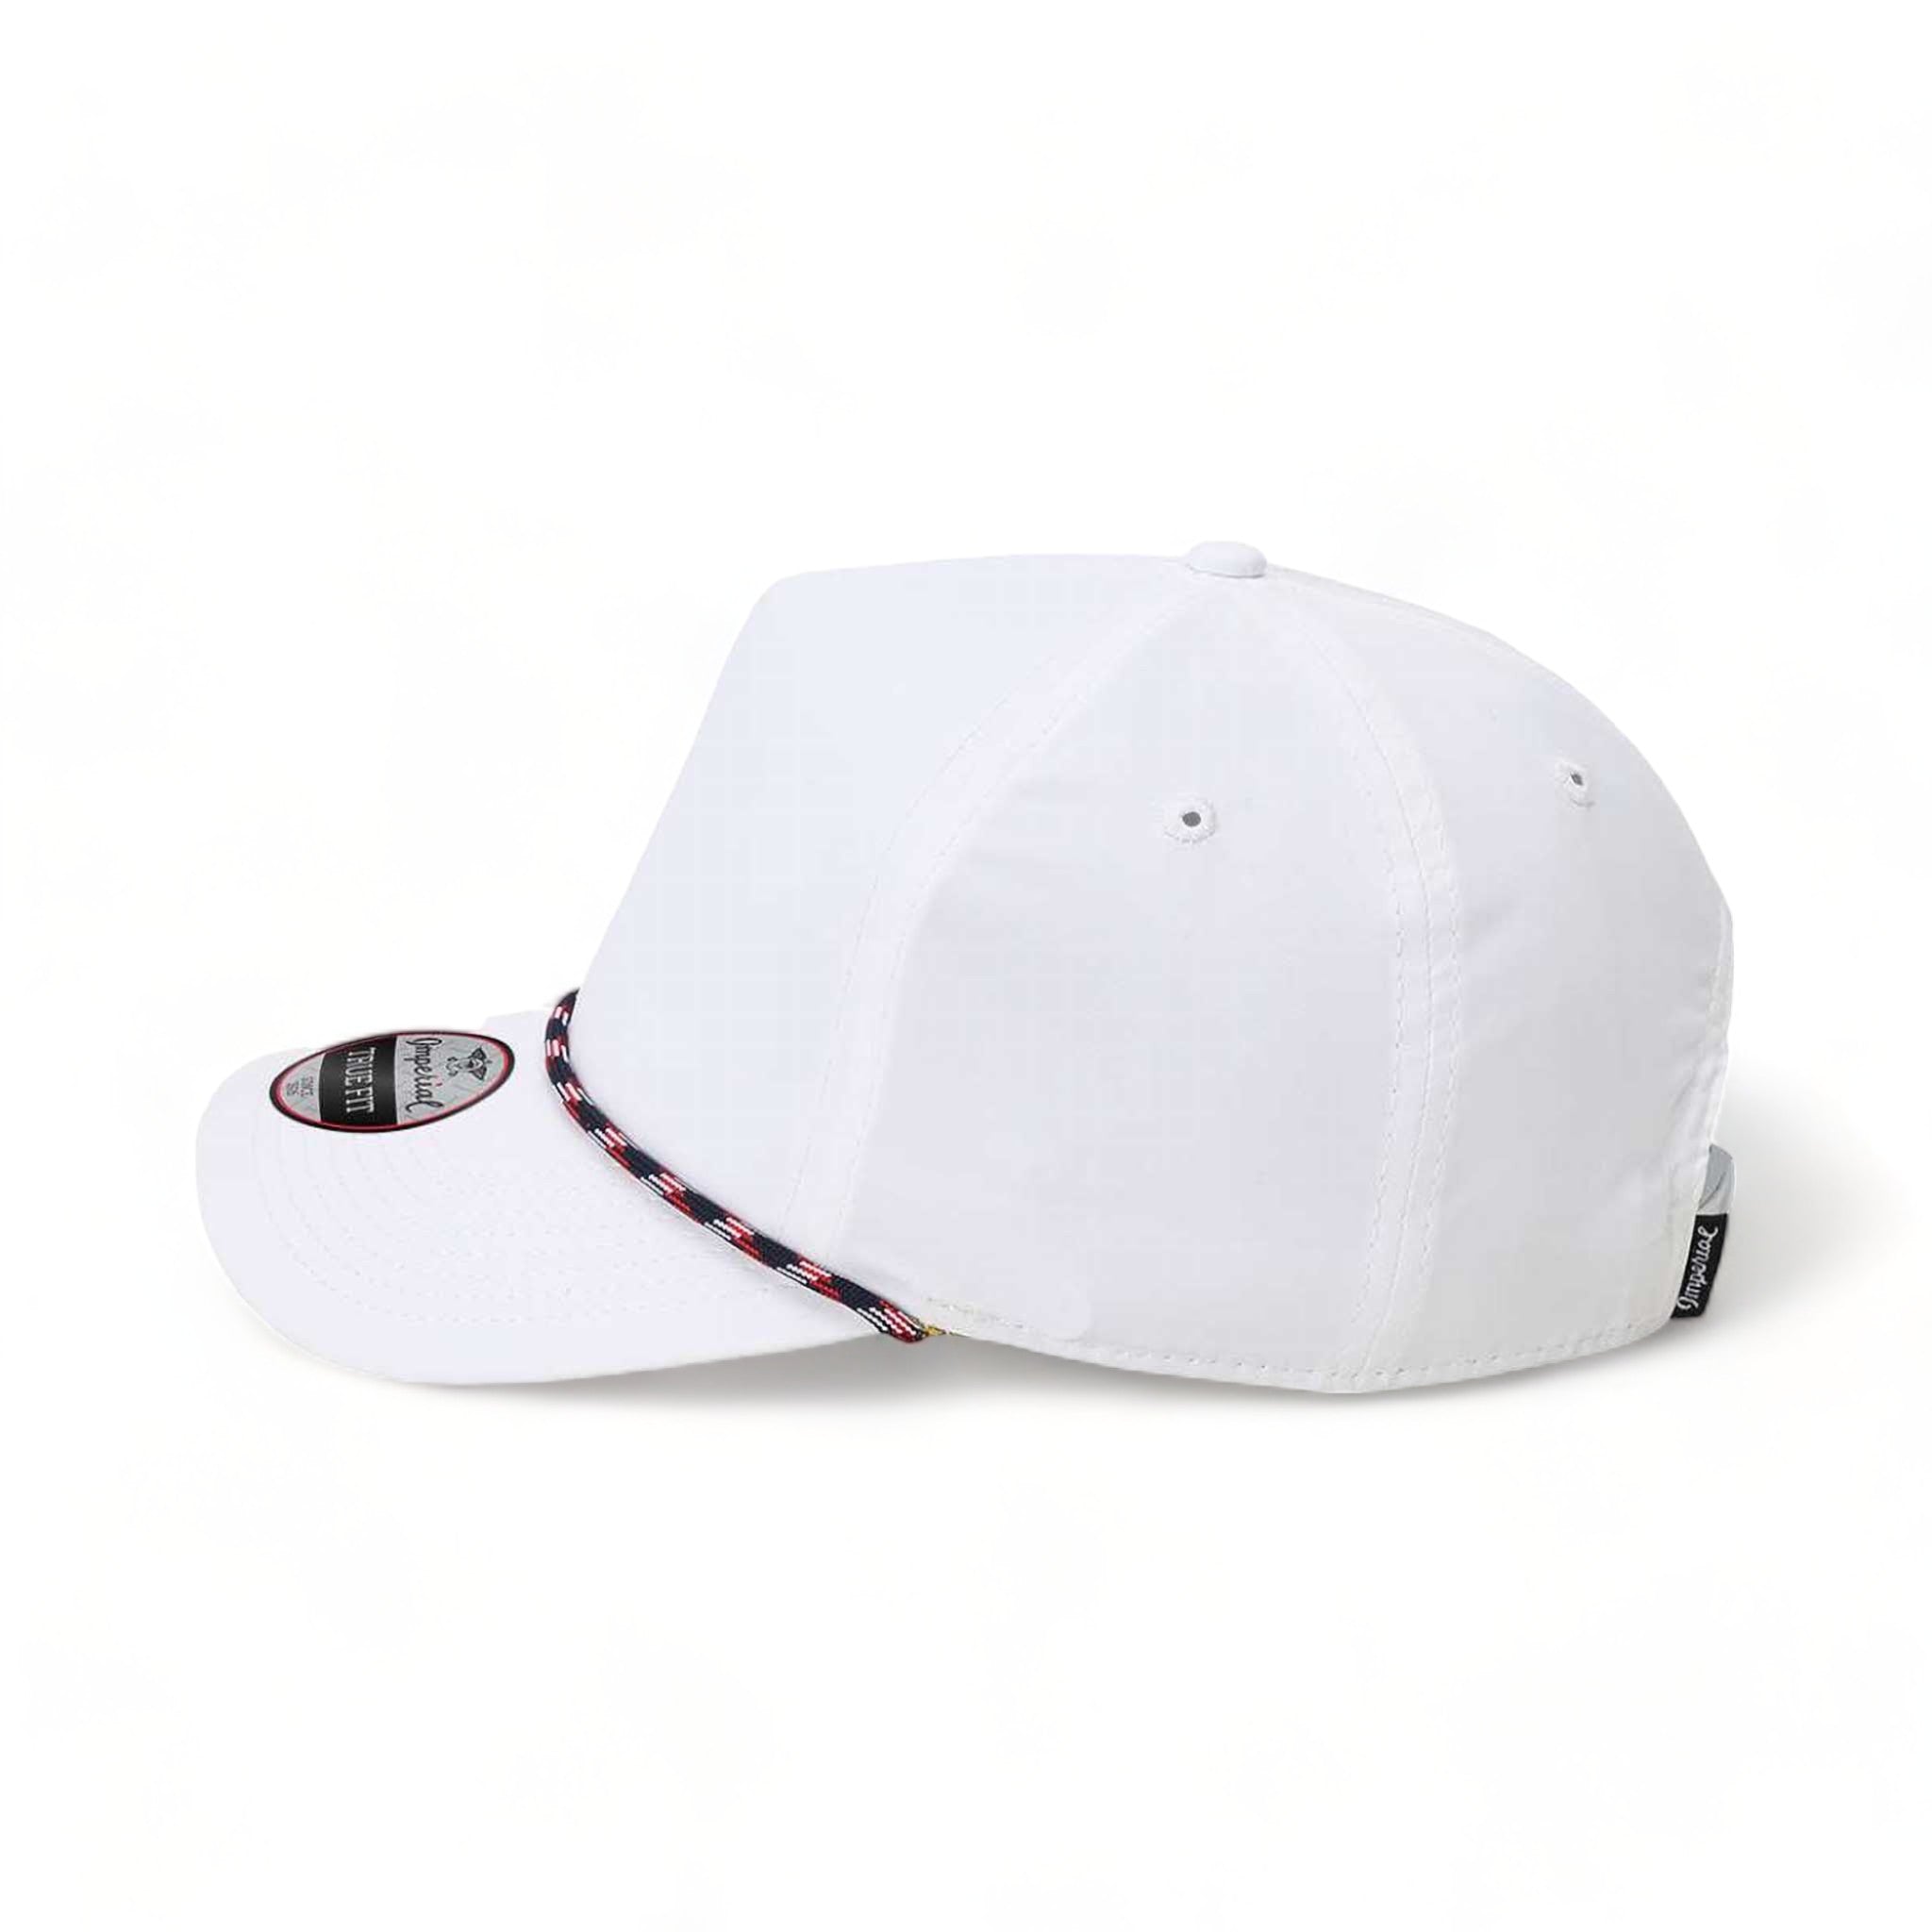 Side view of Imperial 5054 custom hat in white and navy-red